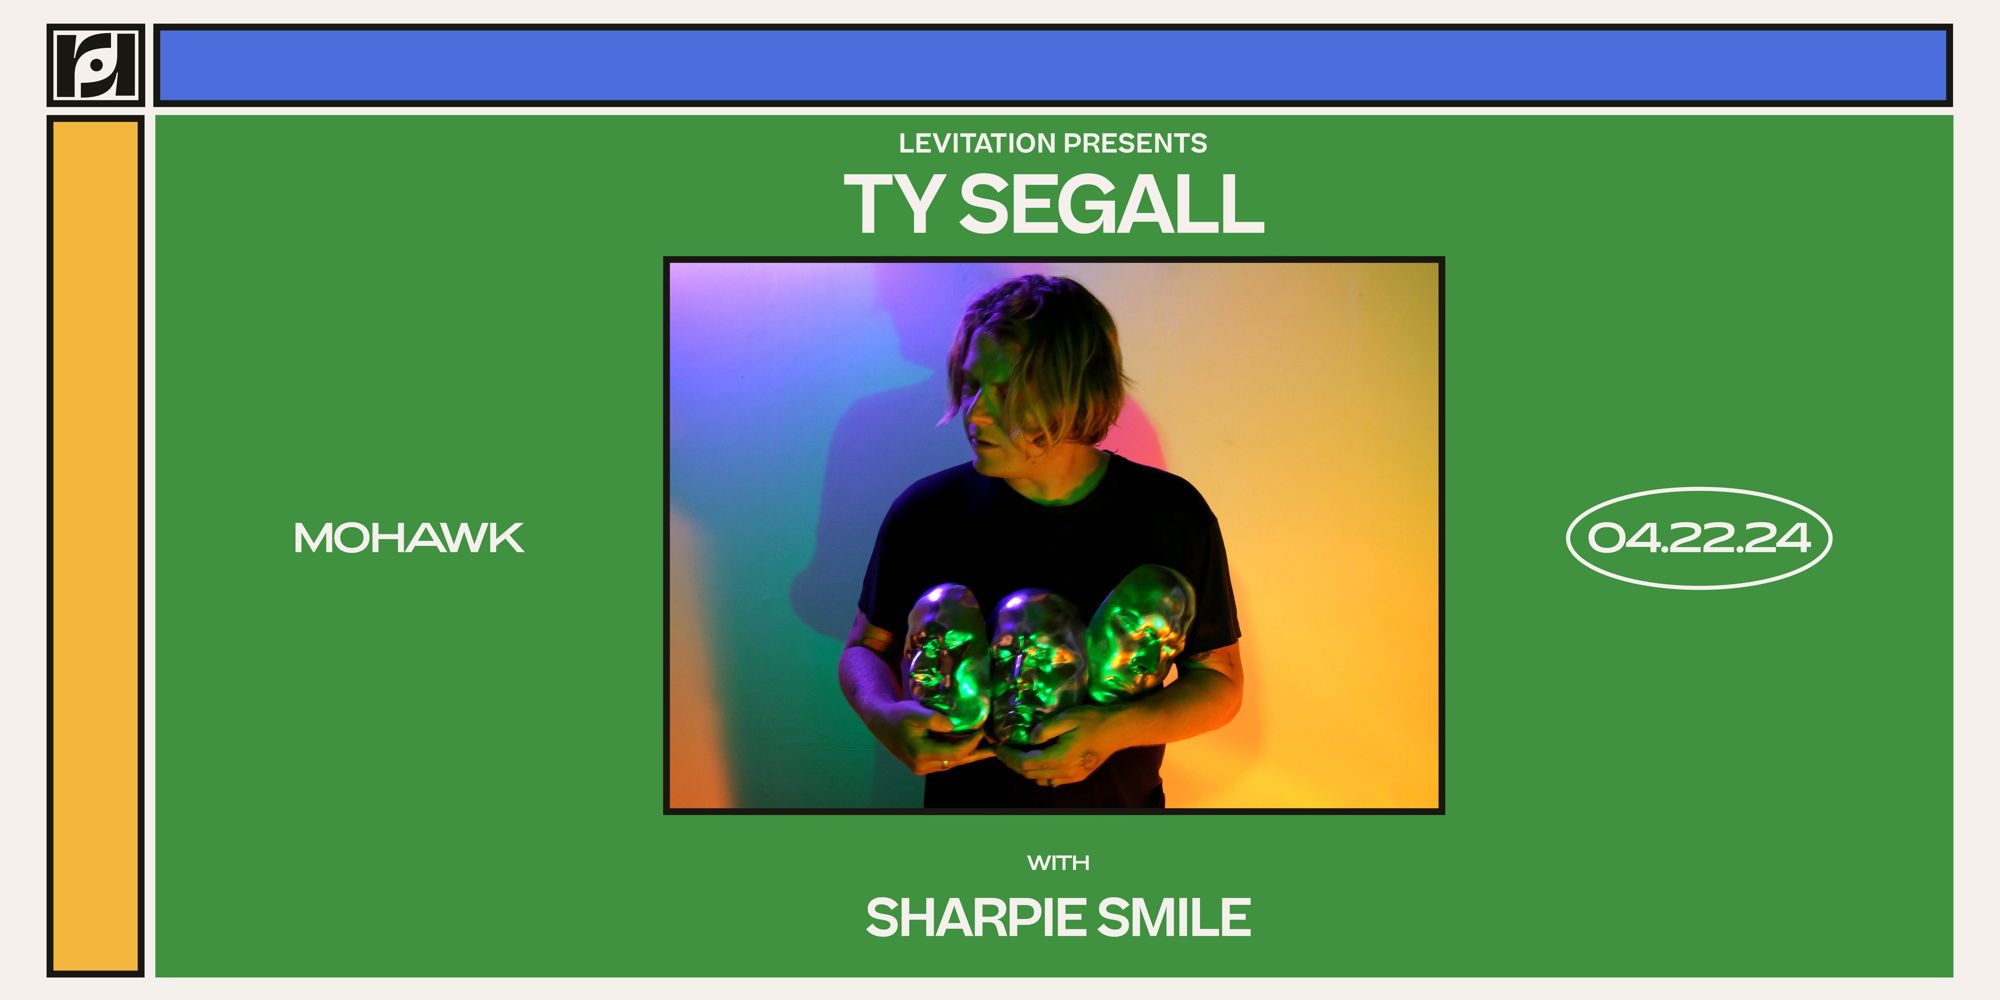  Resound & Levitation Present: Ty Segall w/ Sharpie Smile at Mohawk promotional image